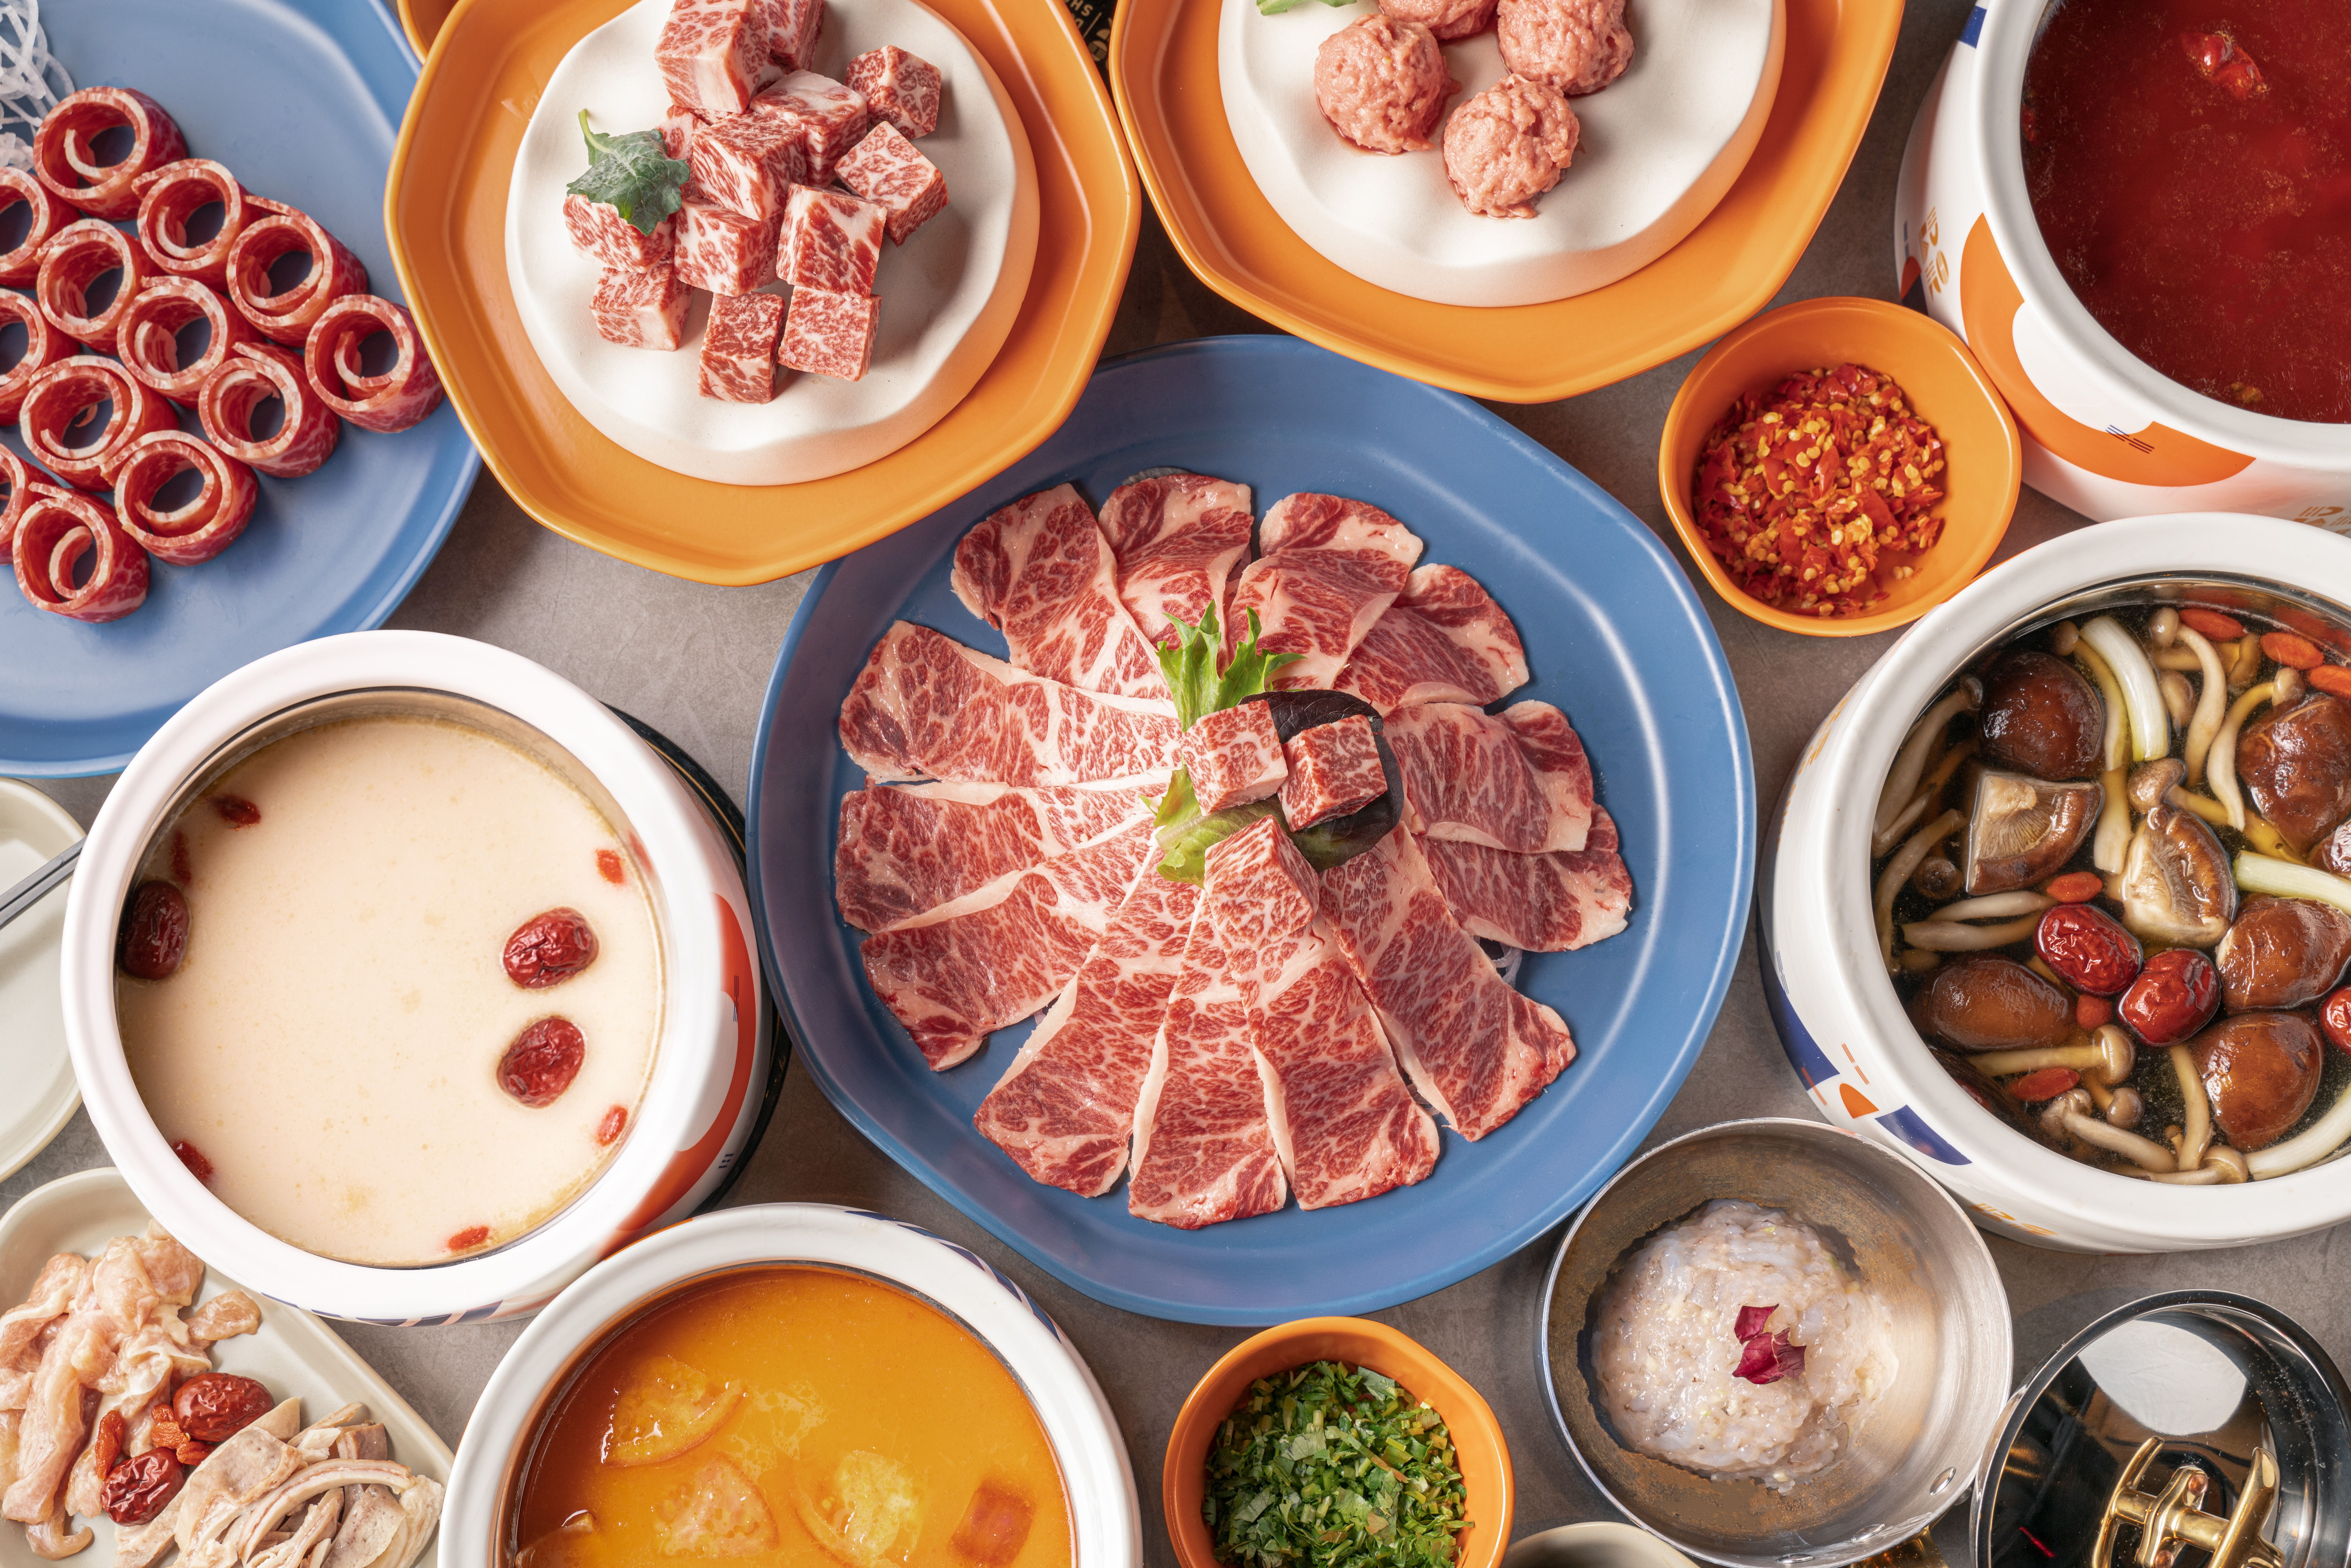 A hot pot spread at the Dolar Shop full of meats and broths.